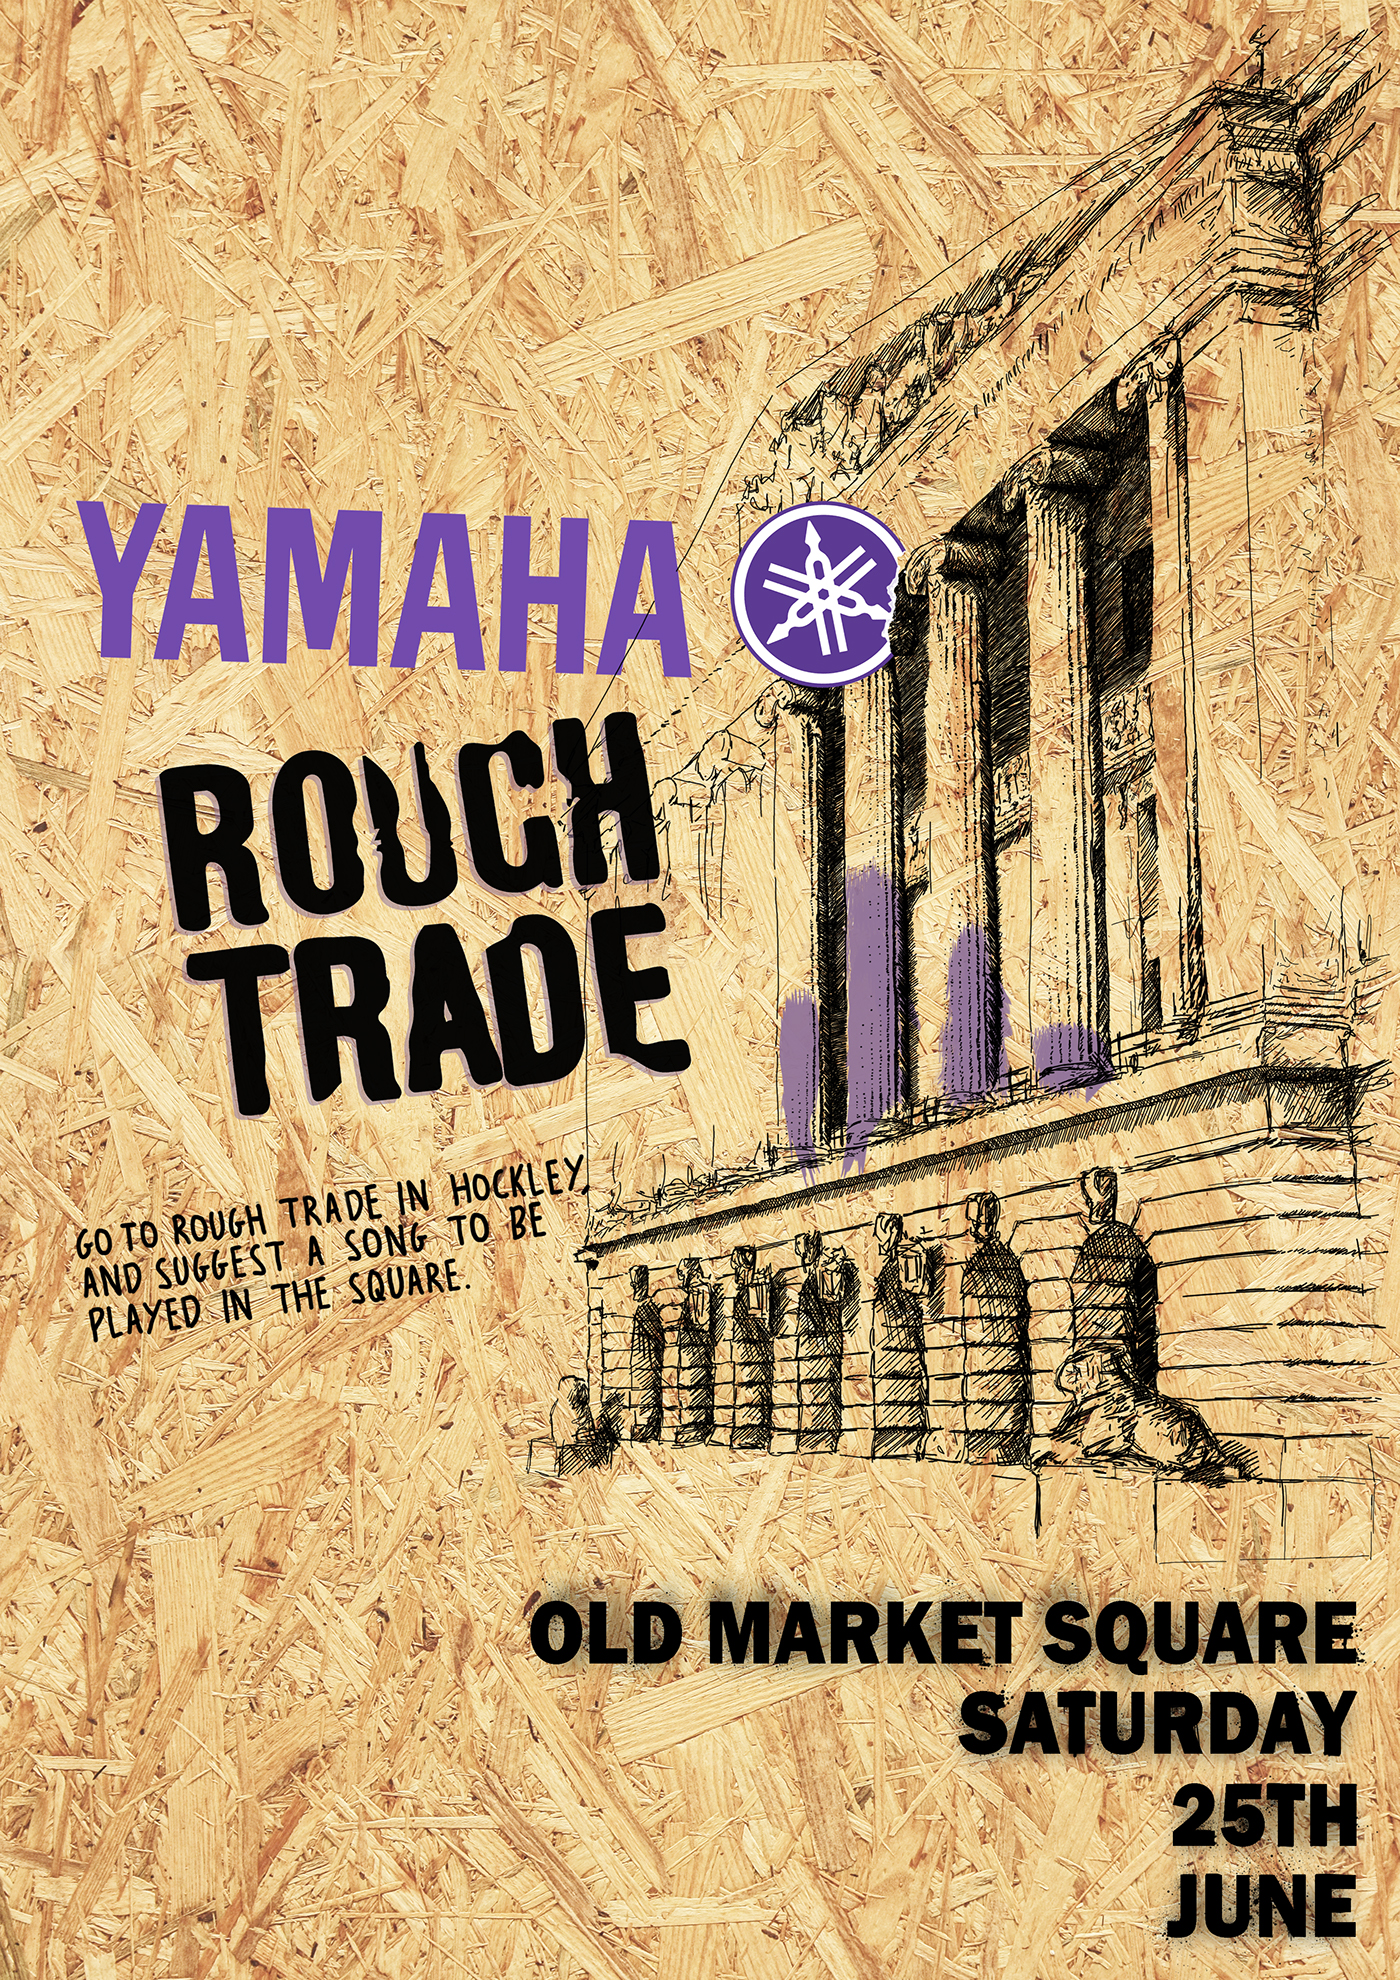 Event Rough Trade yamaha music genres Nottingham square Education discover branding  Advertising 